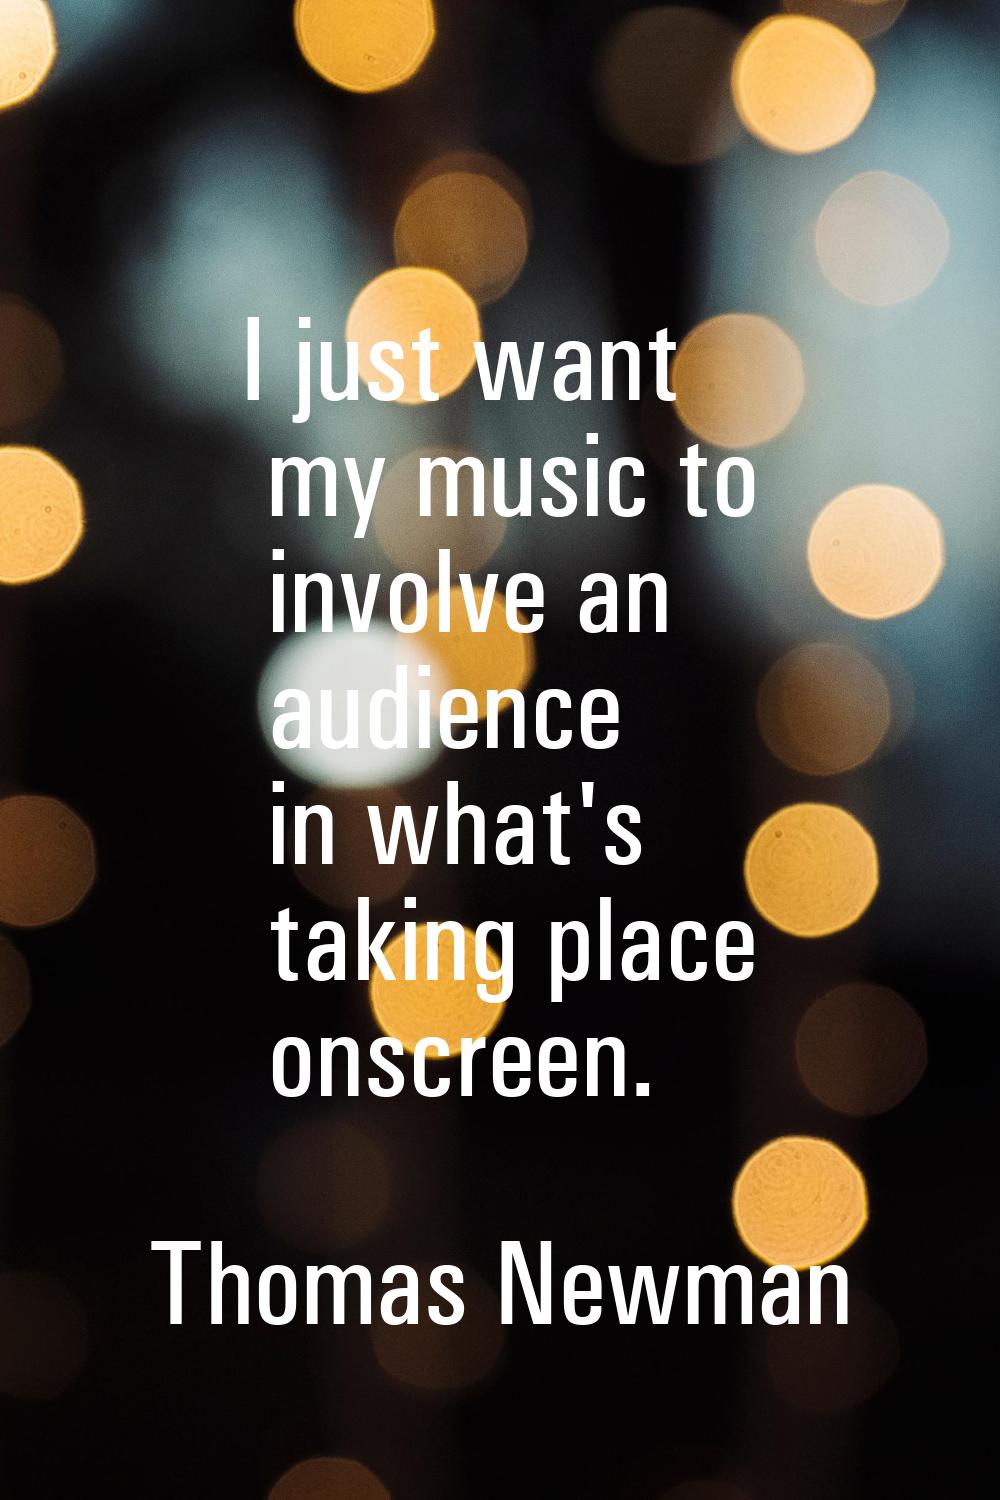 I just want my music to involve an audience in what's taking place onscreen.